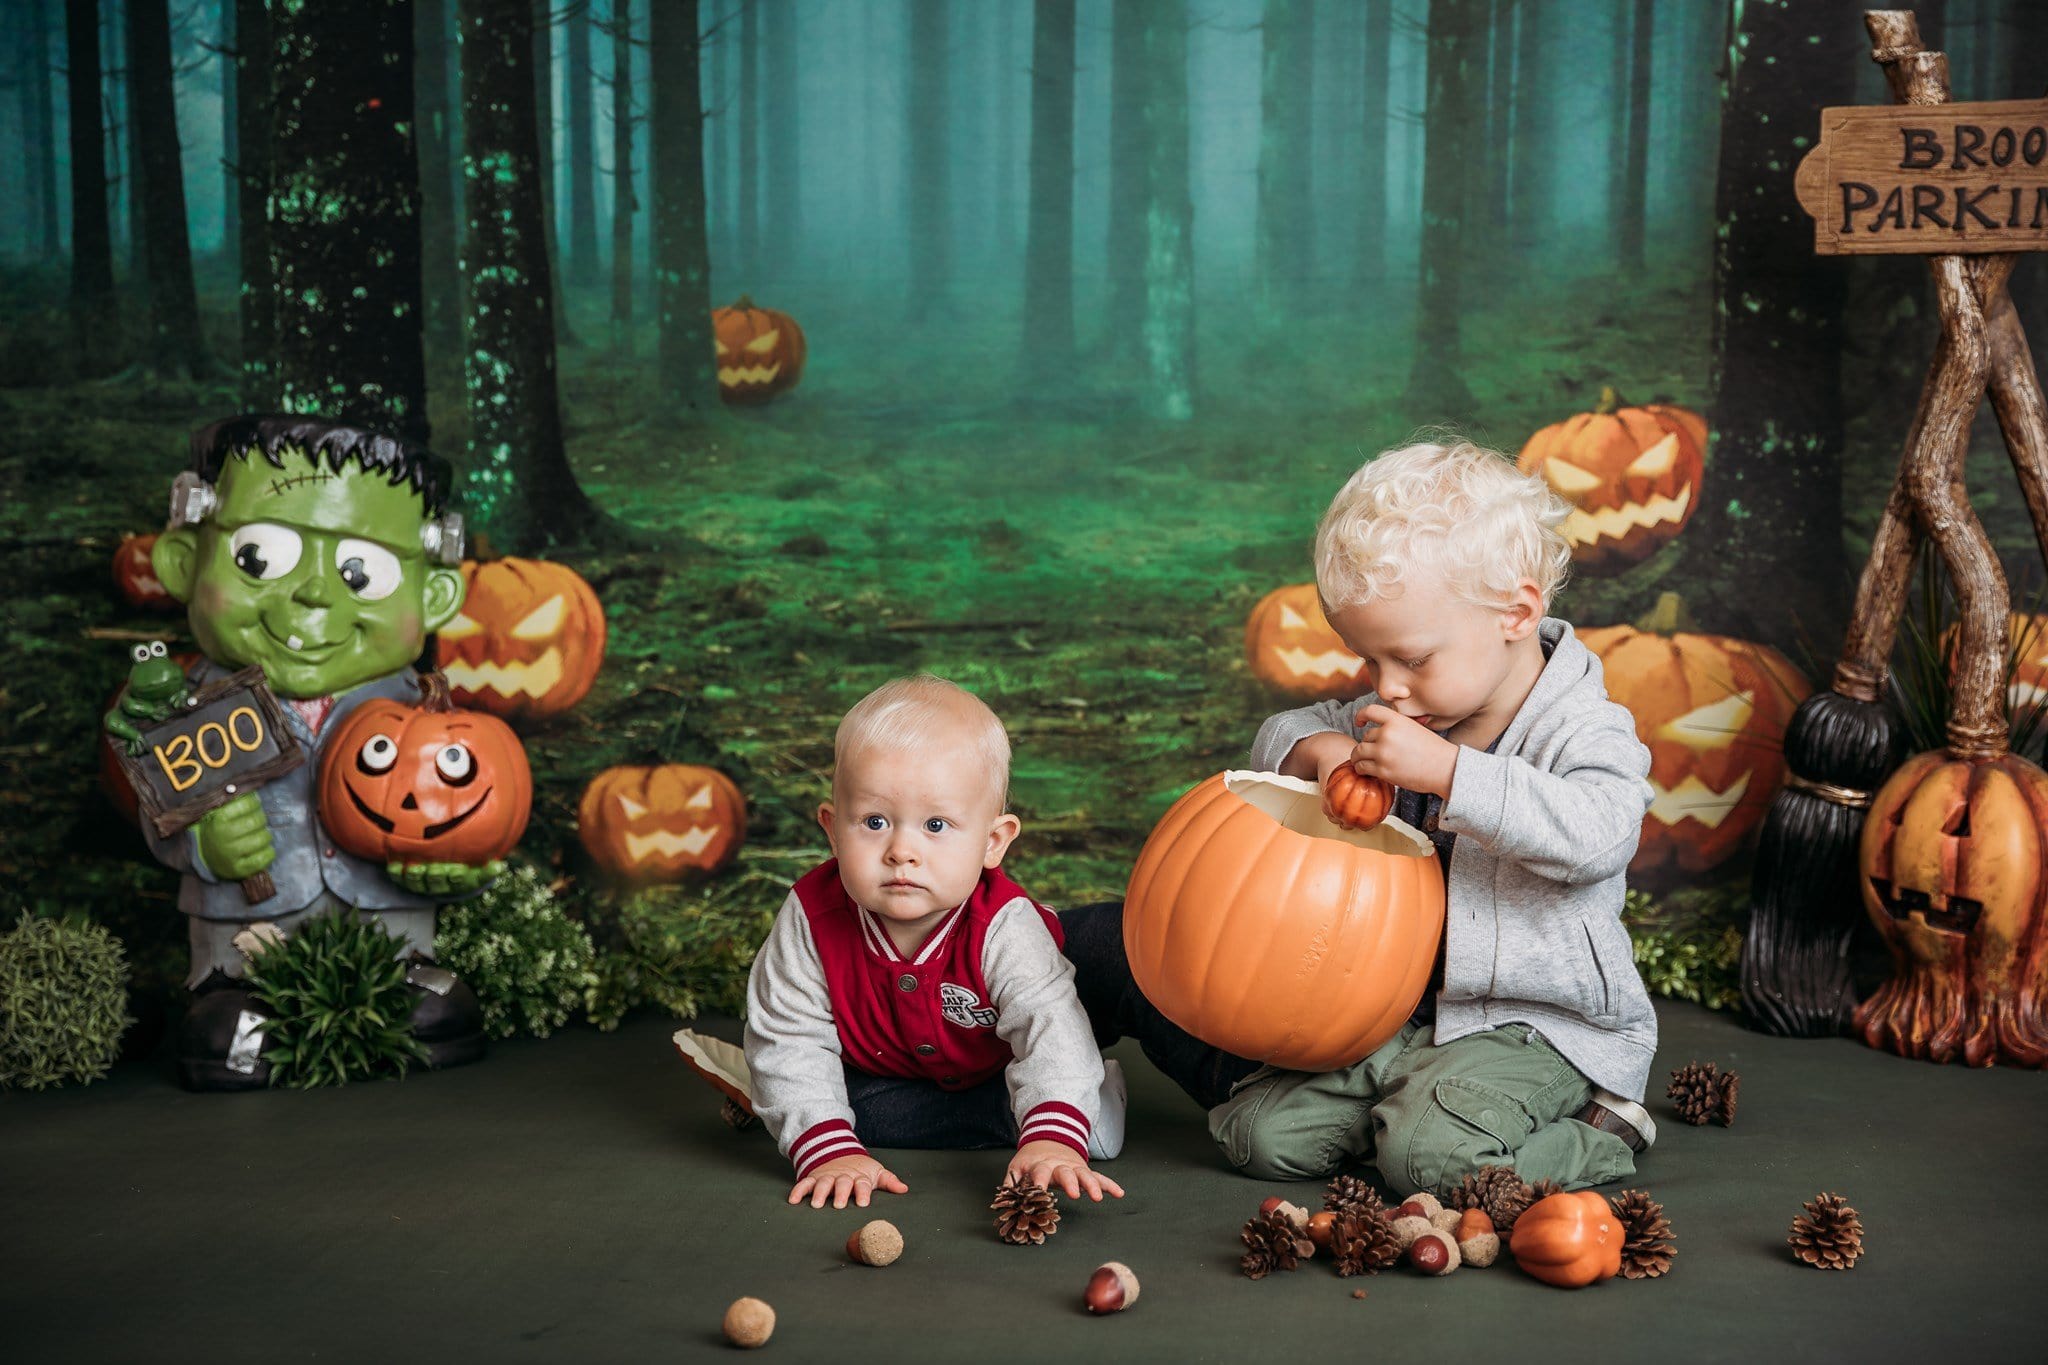 Kate Halloween Backdrop Pumpkins Forest Designed by Chain Photography - Kate Backdrop